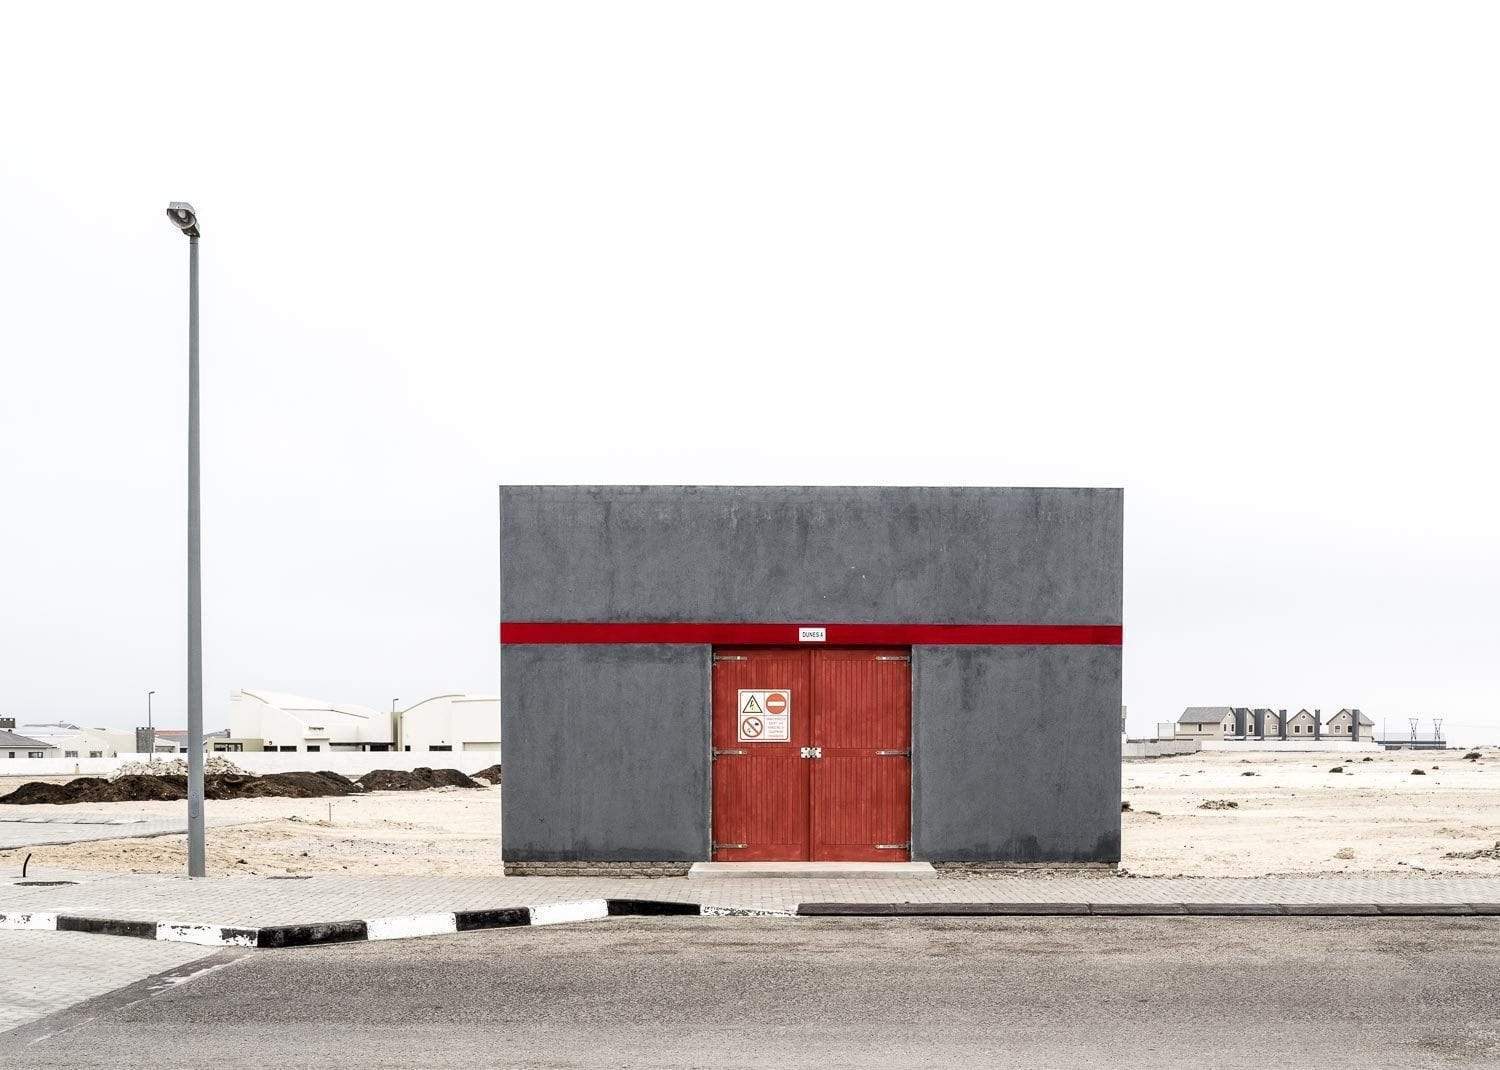 A guest house with a road light, Namibia #7